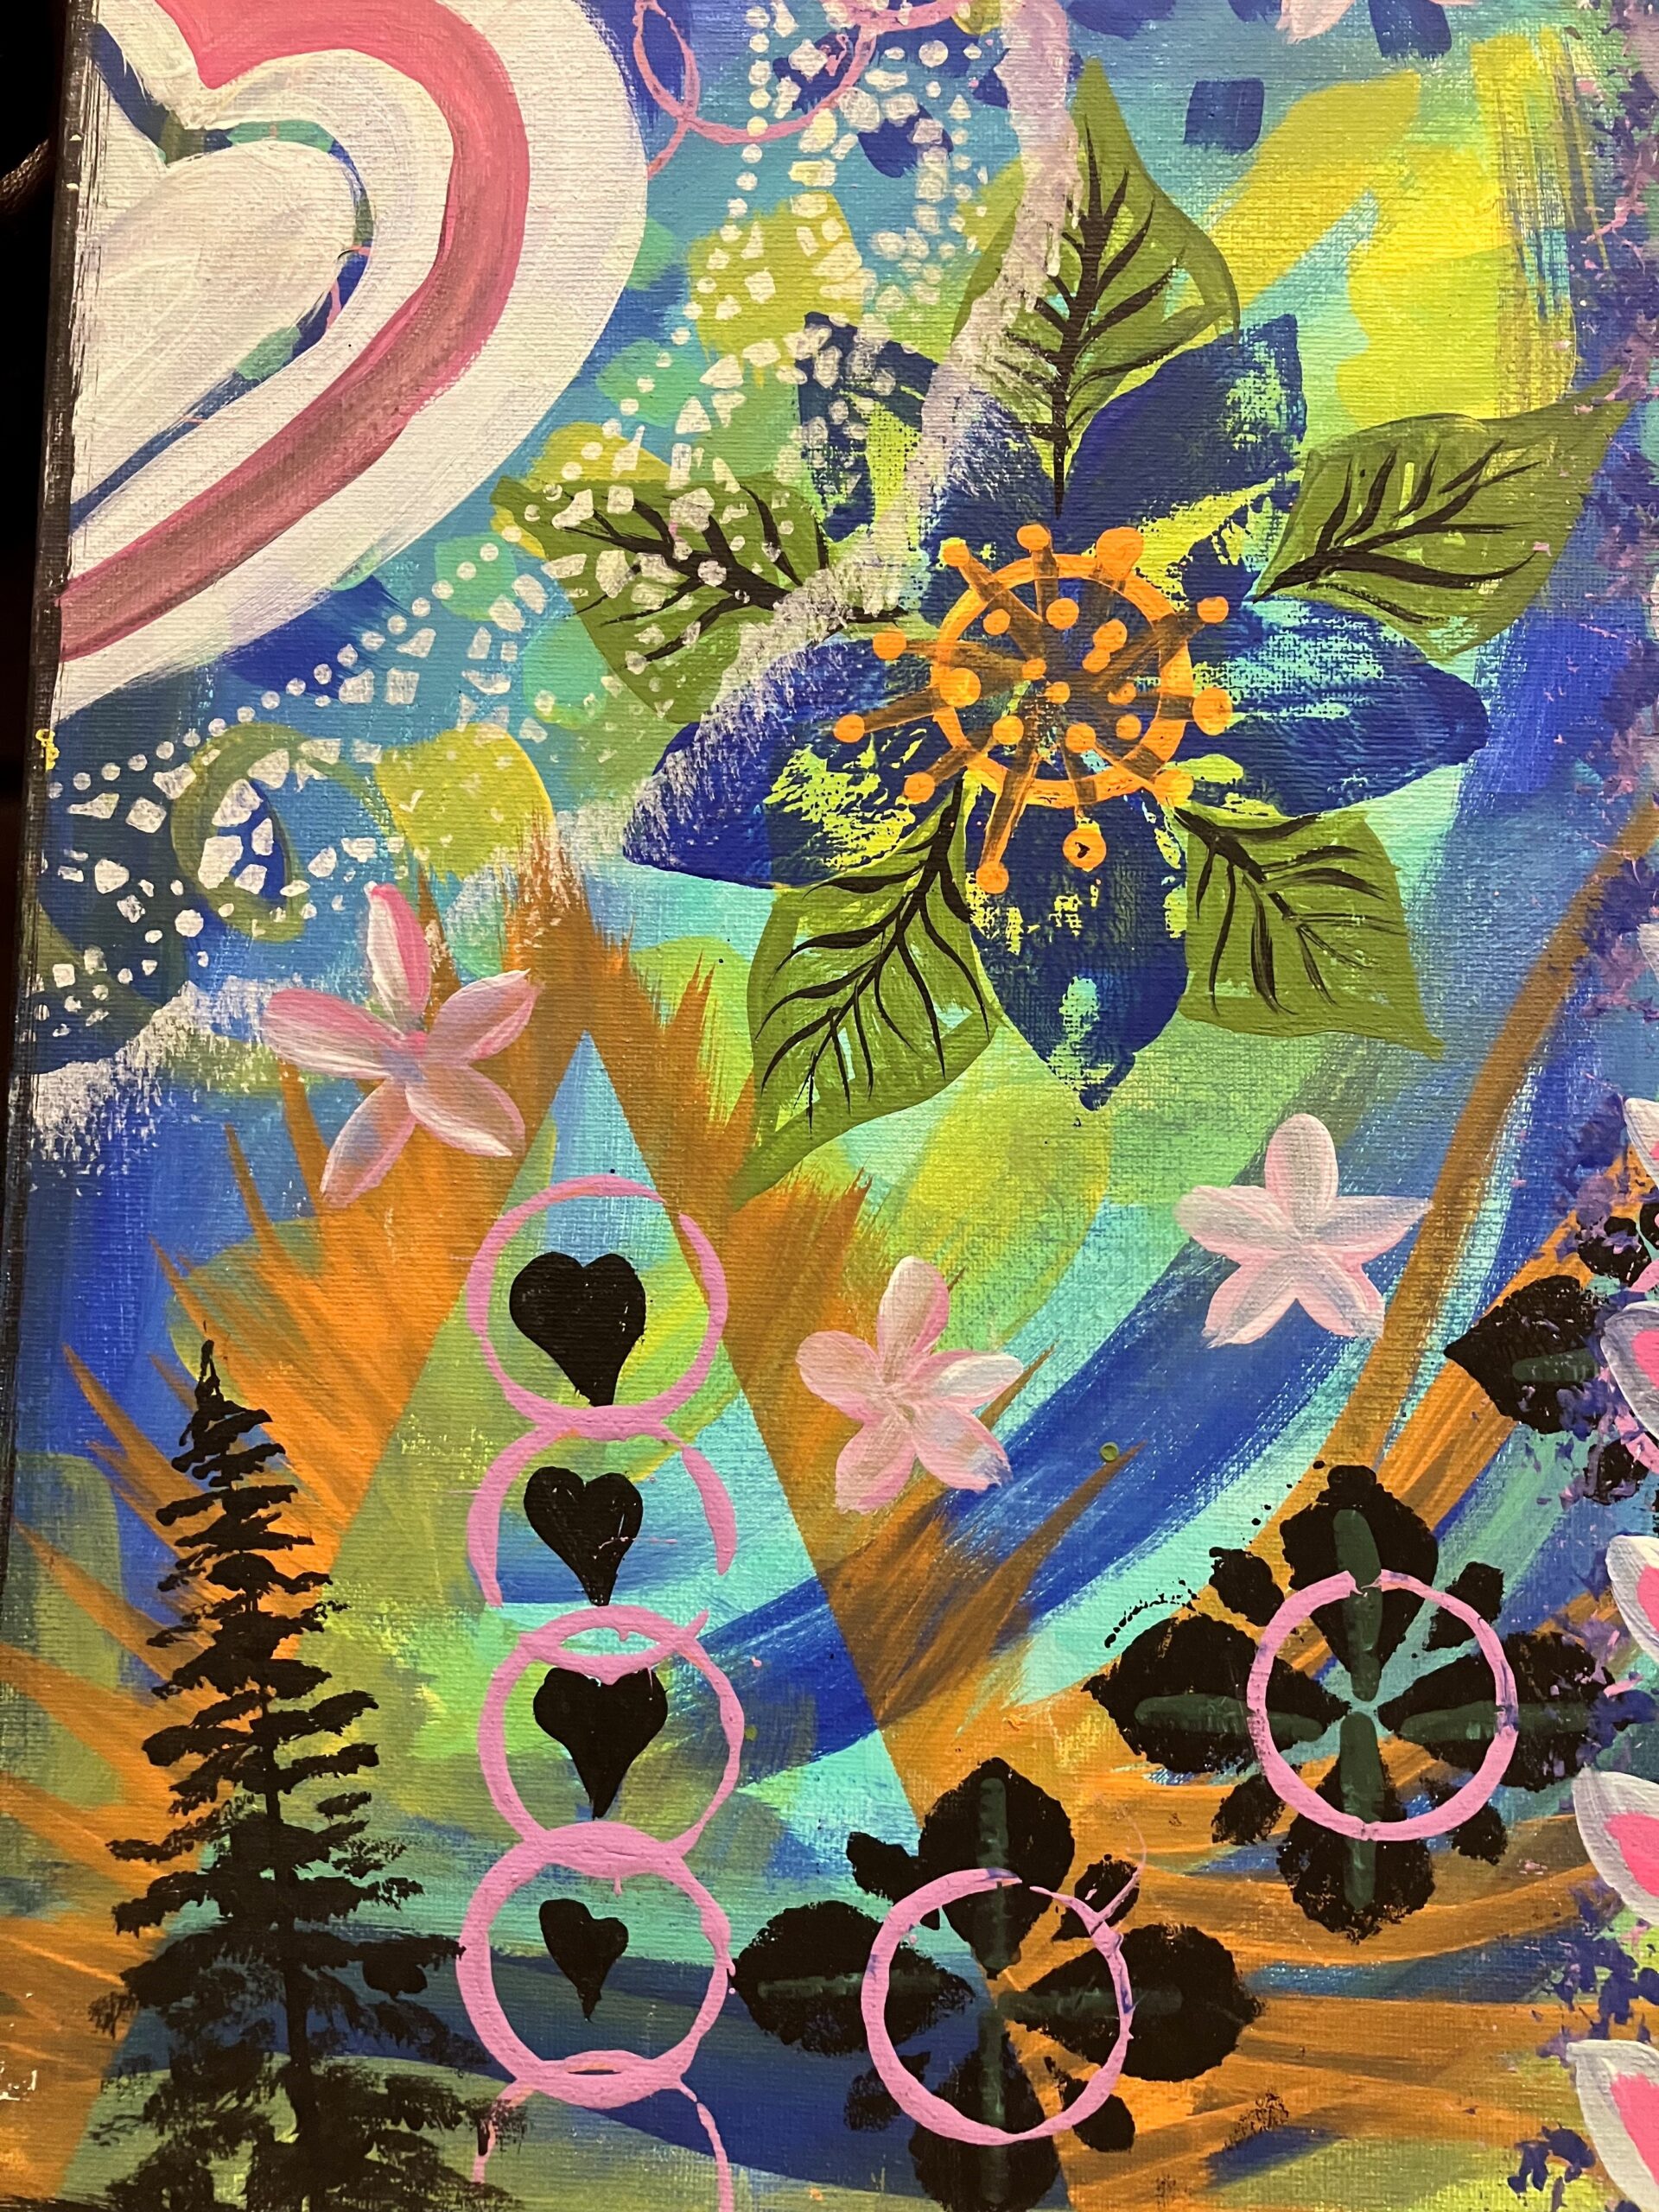 Sample 4 of a colourful painting created with stencils and other random items with trees, hearts, circles